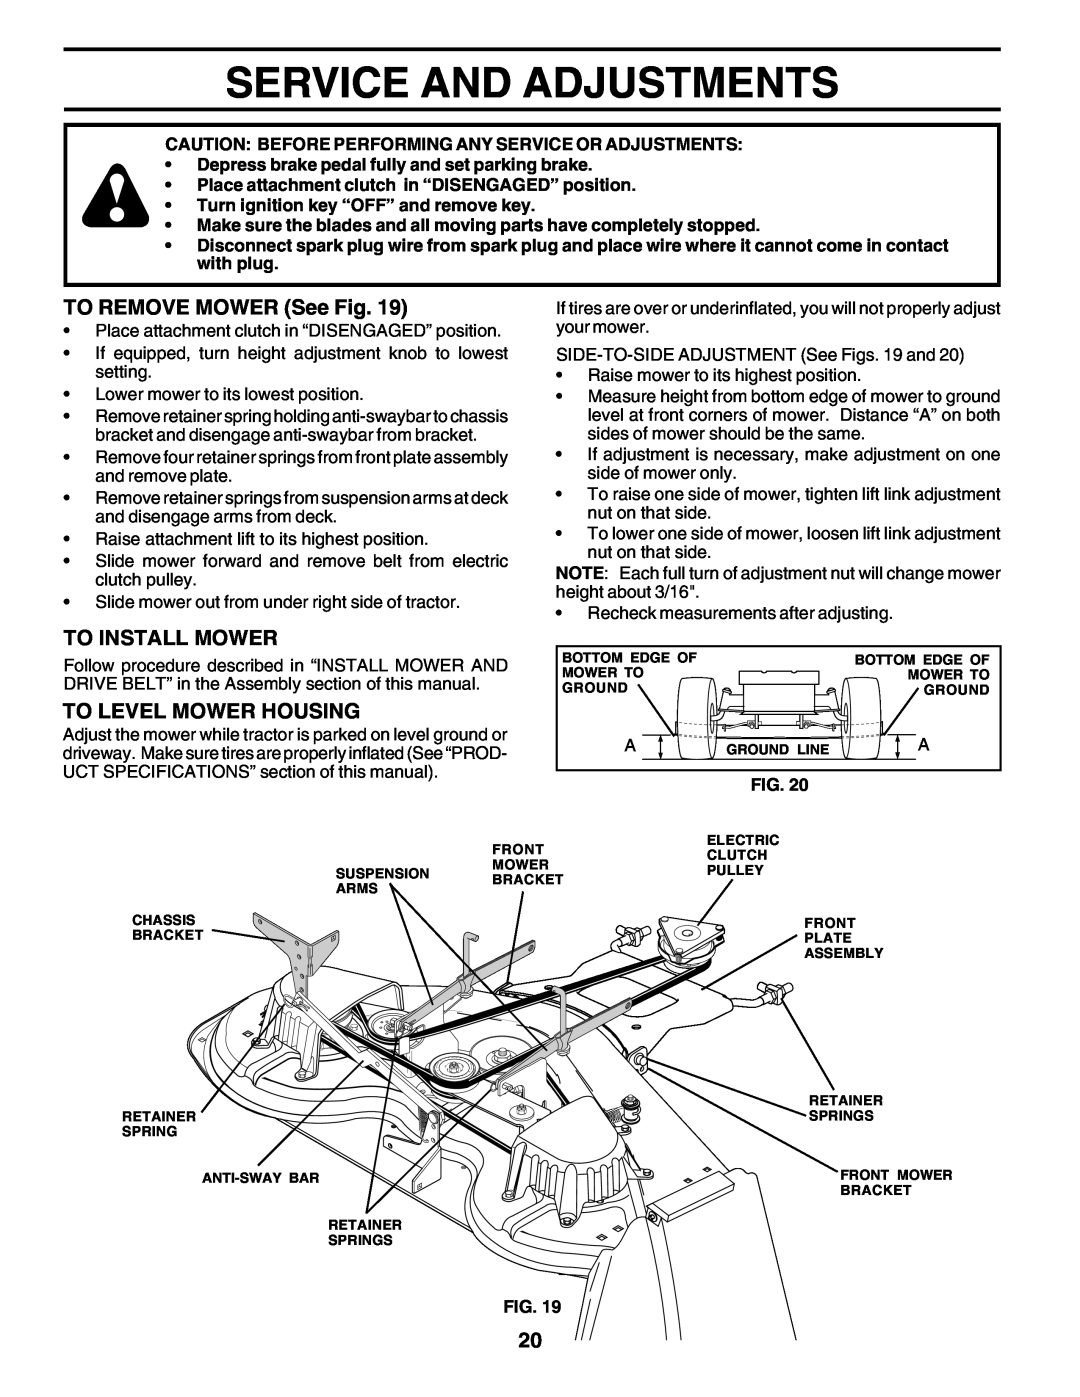 Poulan PRGT22H50D owner manual Service And Adjustments, TO REMOVE MOWER See Fig, To Install Mower, To Level Mower Housing 